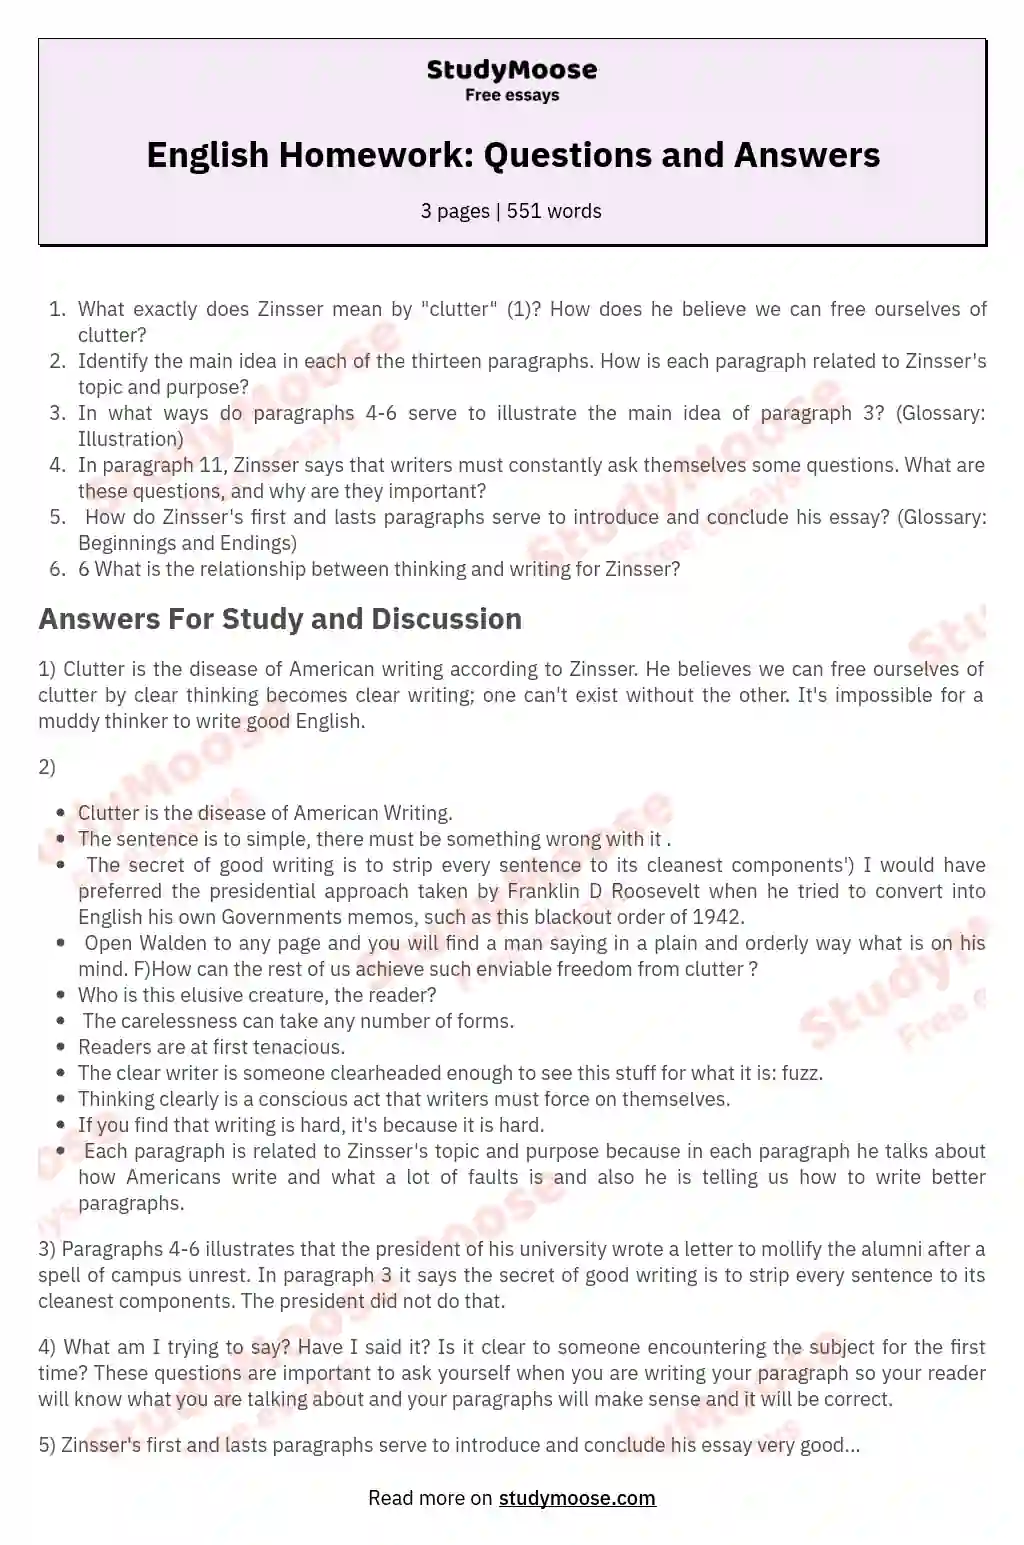 English Homework: Questions and Answers essay